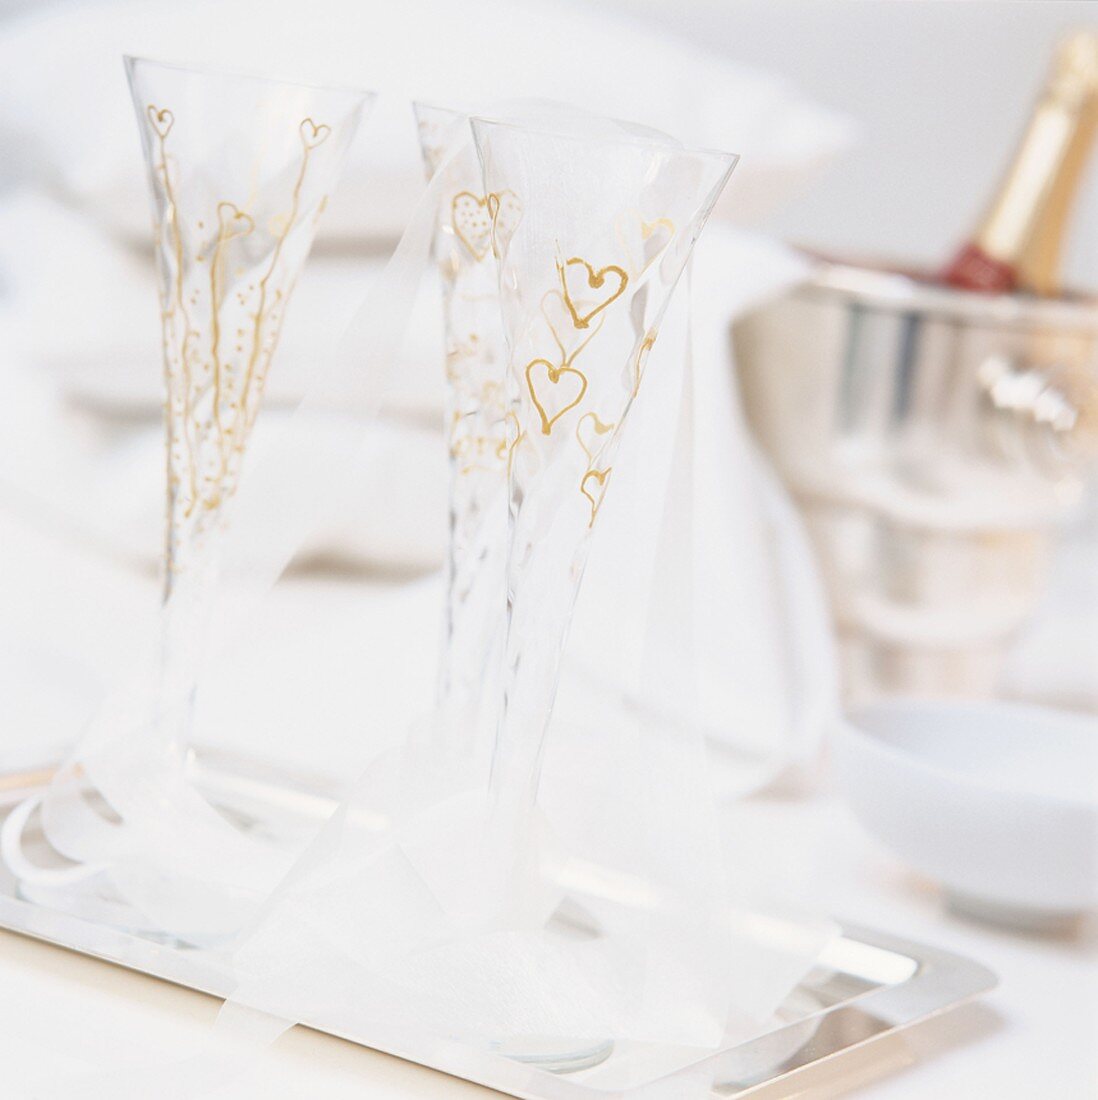 Champagne glasses with painted hearts